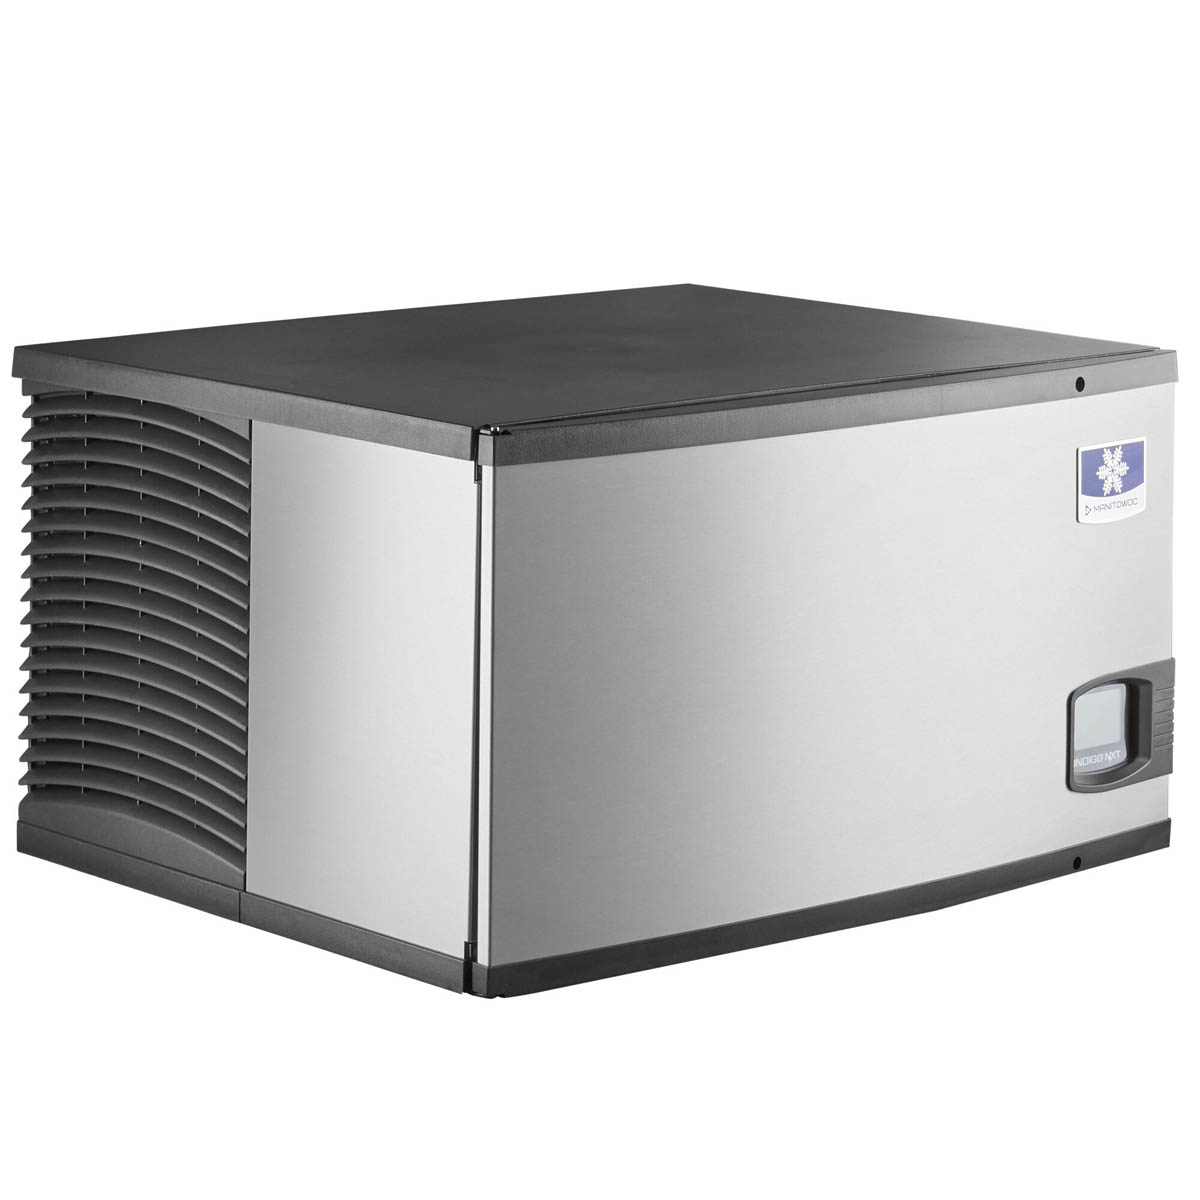 Manitowoc IDT0300W 30″ Cube-Style Indigo Nxt™ Series Ice Maker, Water-Cooled, 305 lbs/Day